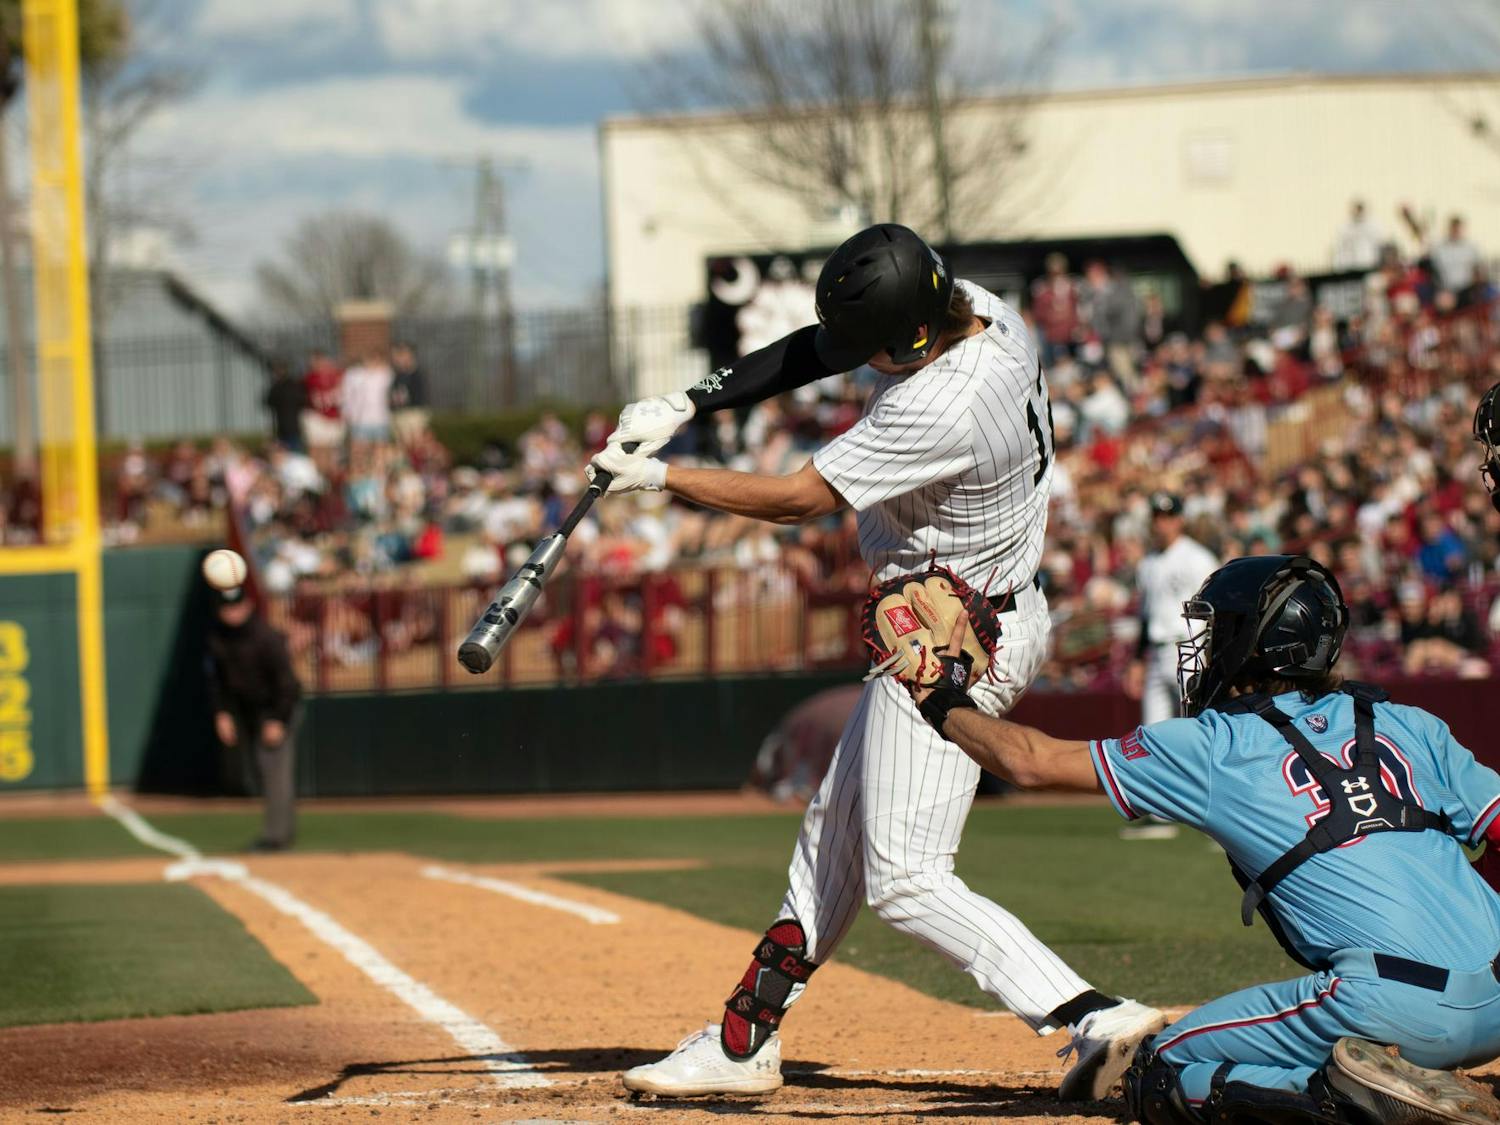 Senior infielder Tyler Causey makes contact with the ball during South Carolina's game against Belmont on Feb. 24, 2024, at Founders Park. Causey went 1-5 in the Gamecocks' 11-2 loss to the Bruins.